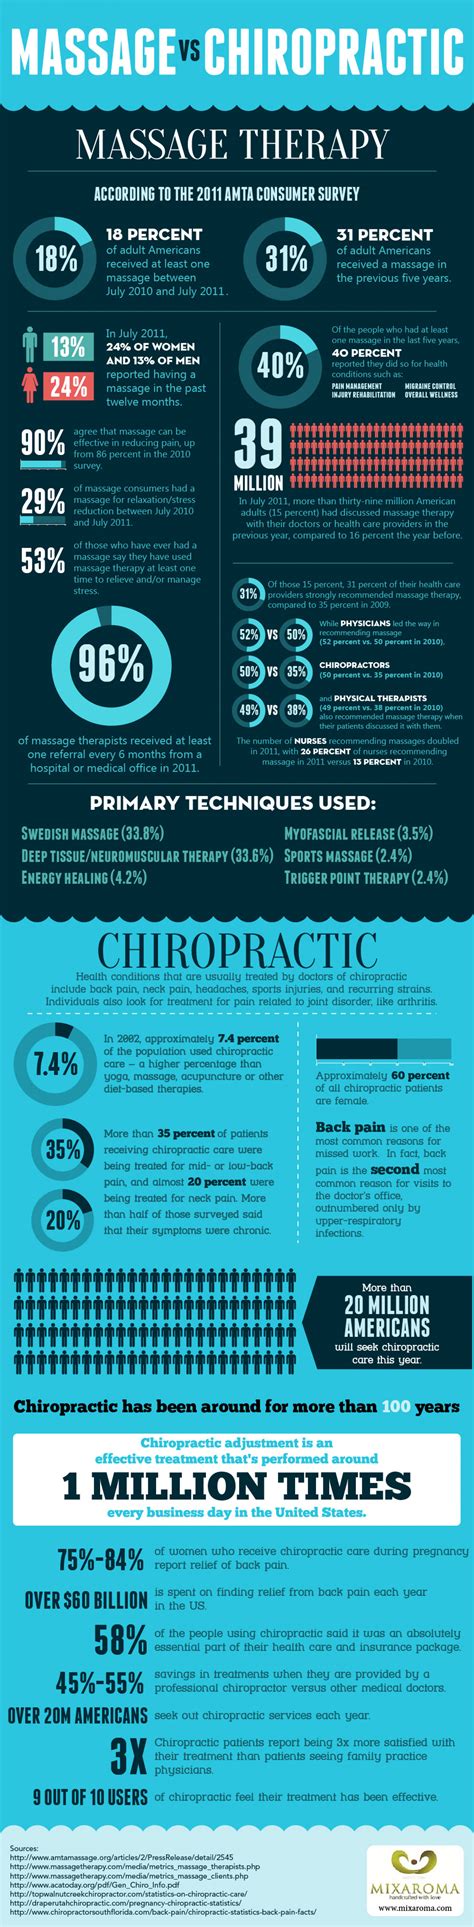 massage vs chiropractic infograpic visual ly